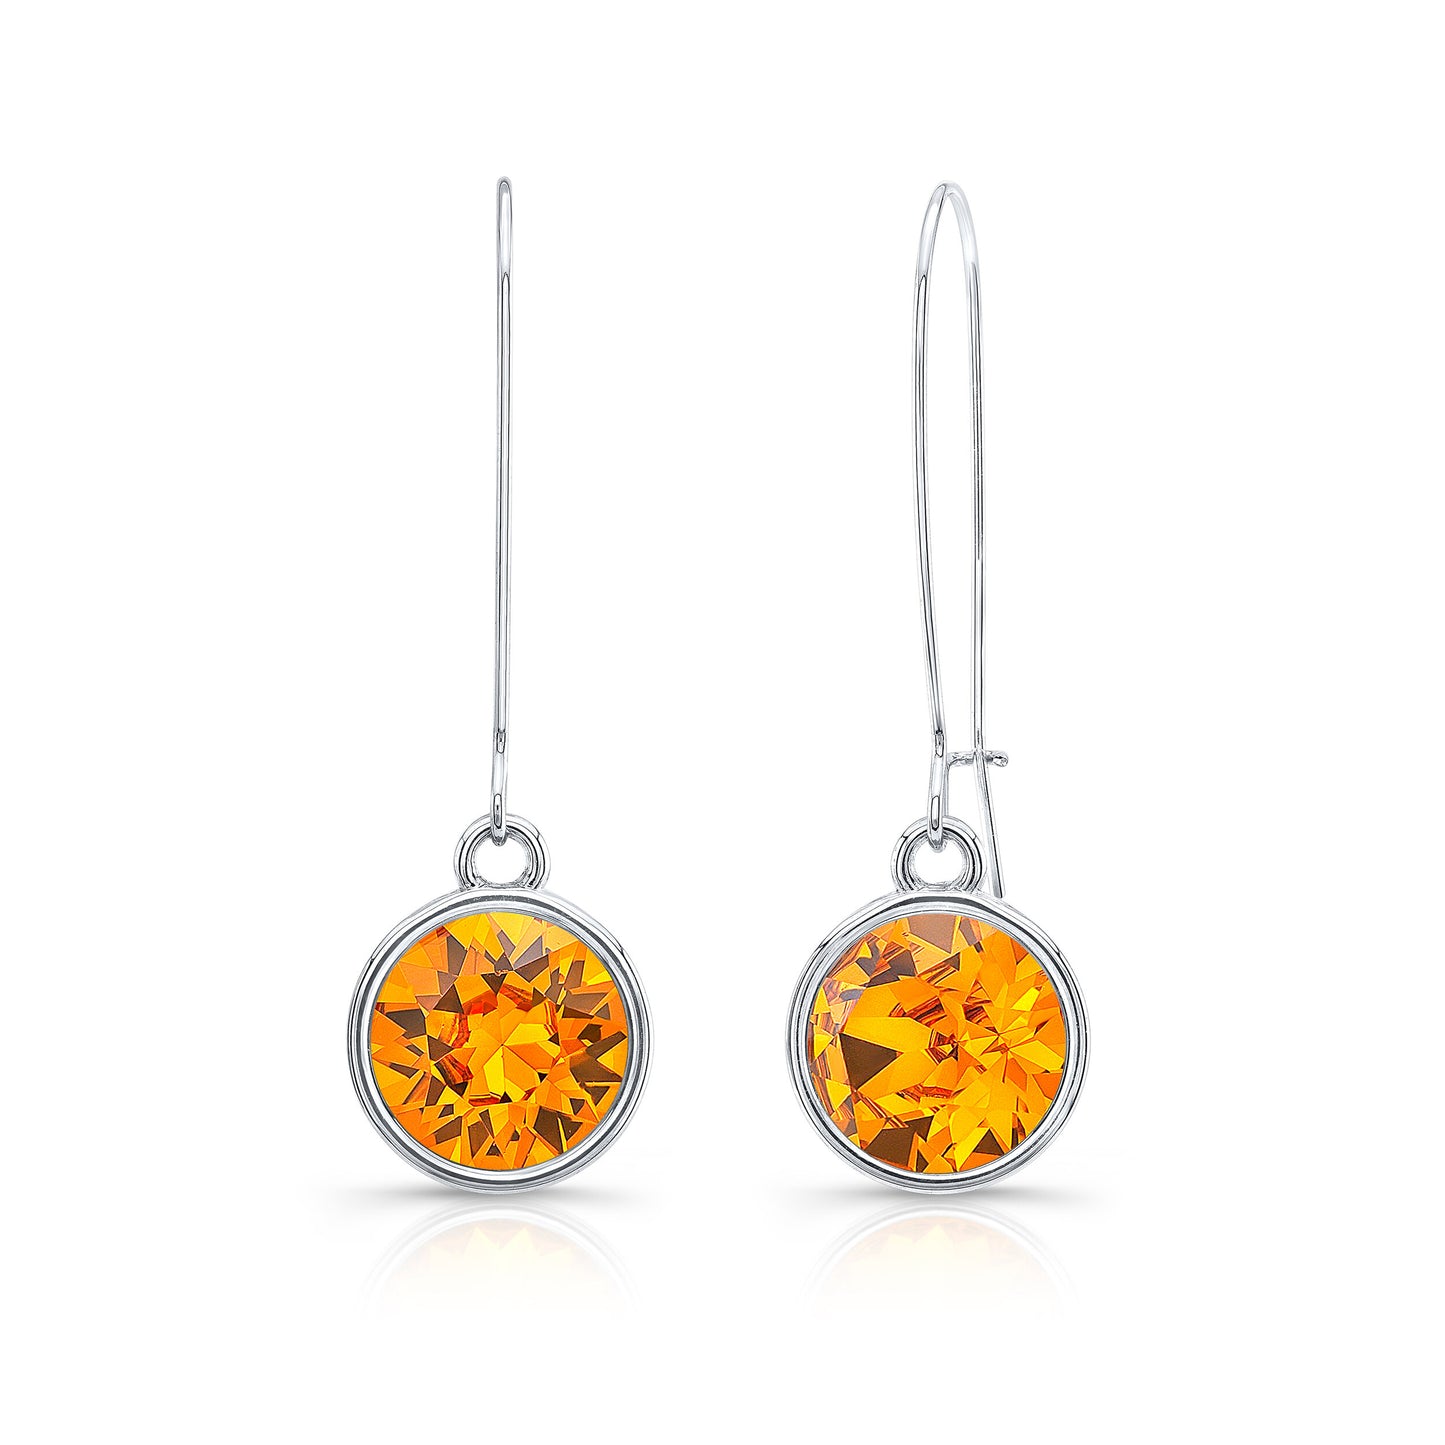 Load image into Gallery viewer, Orange Drop Earrings in White Setting
